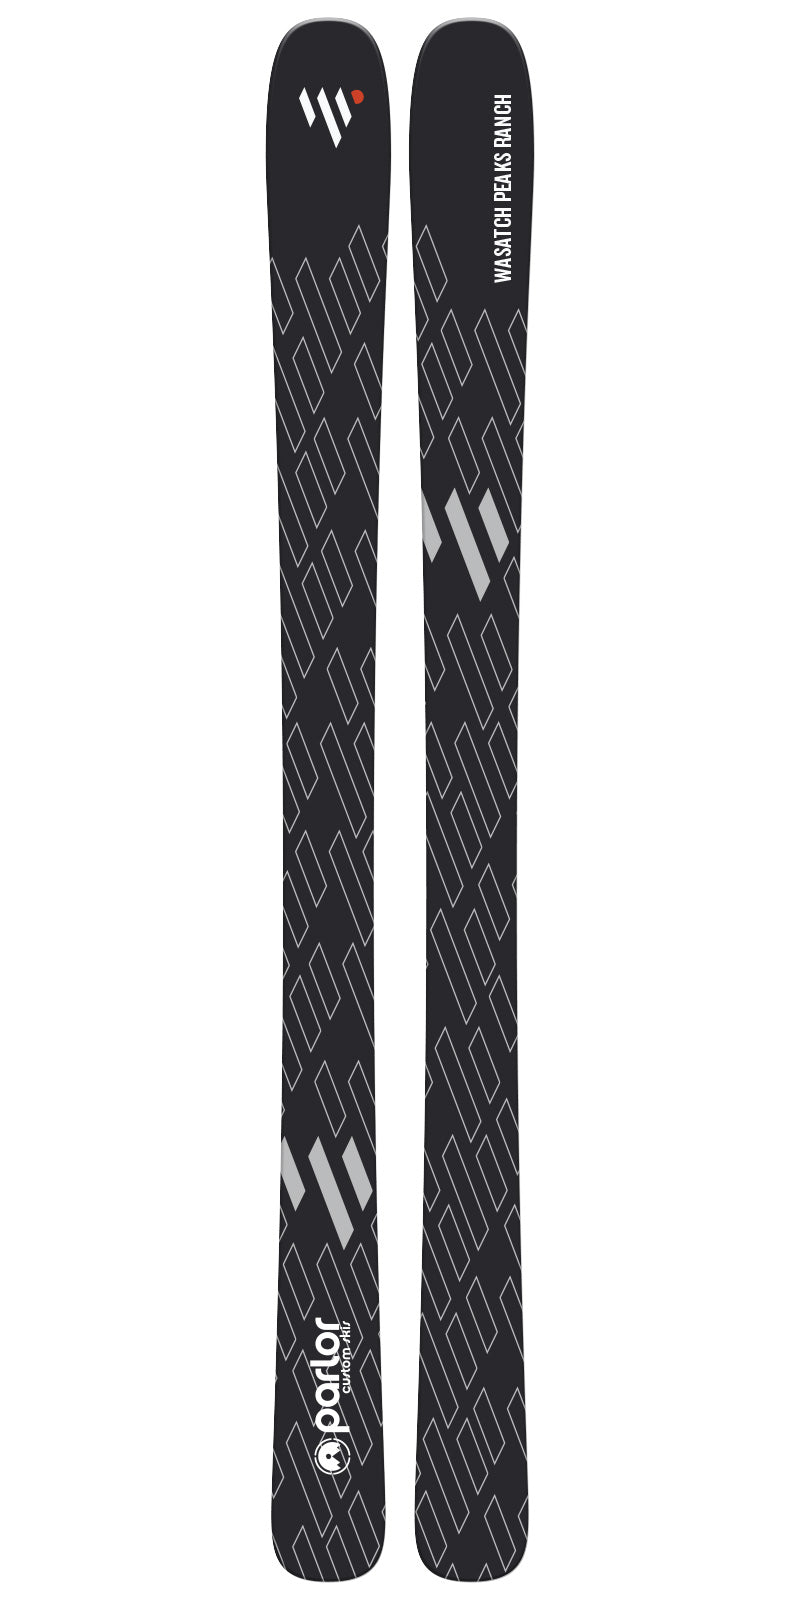 Parlor Skis for Wasatch Peaks Ranch